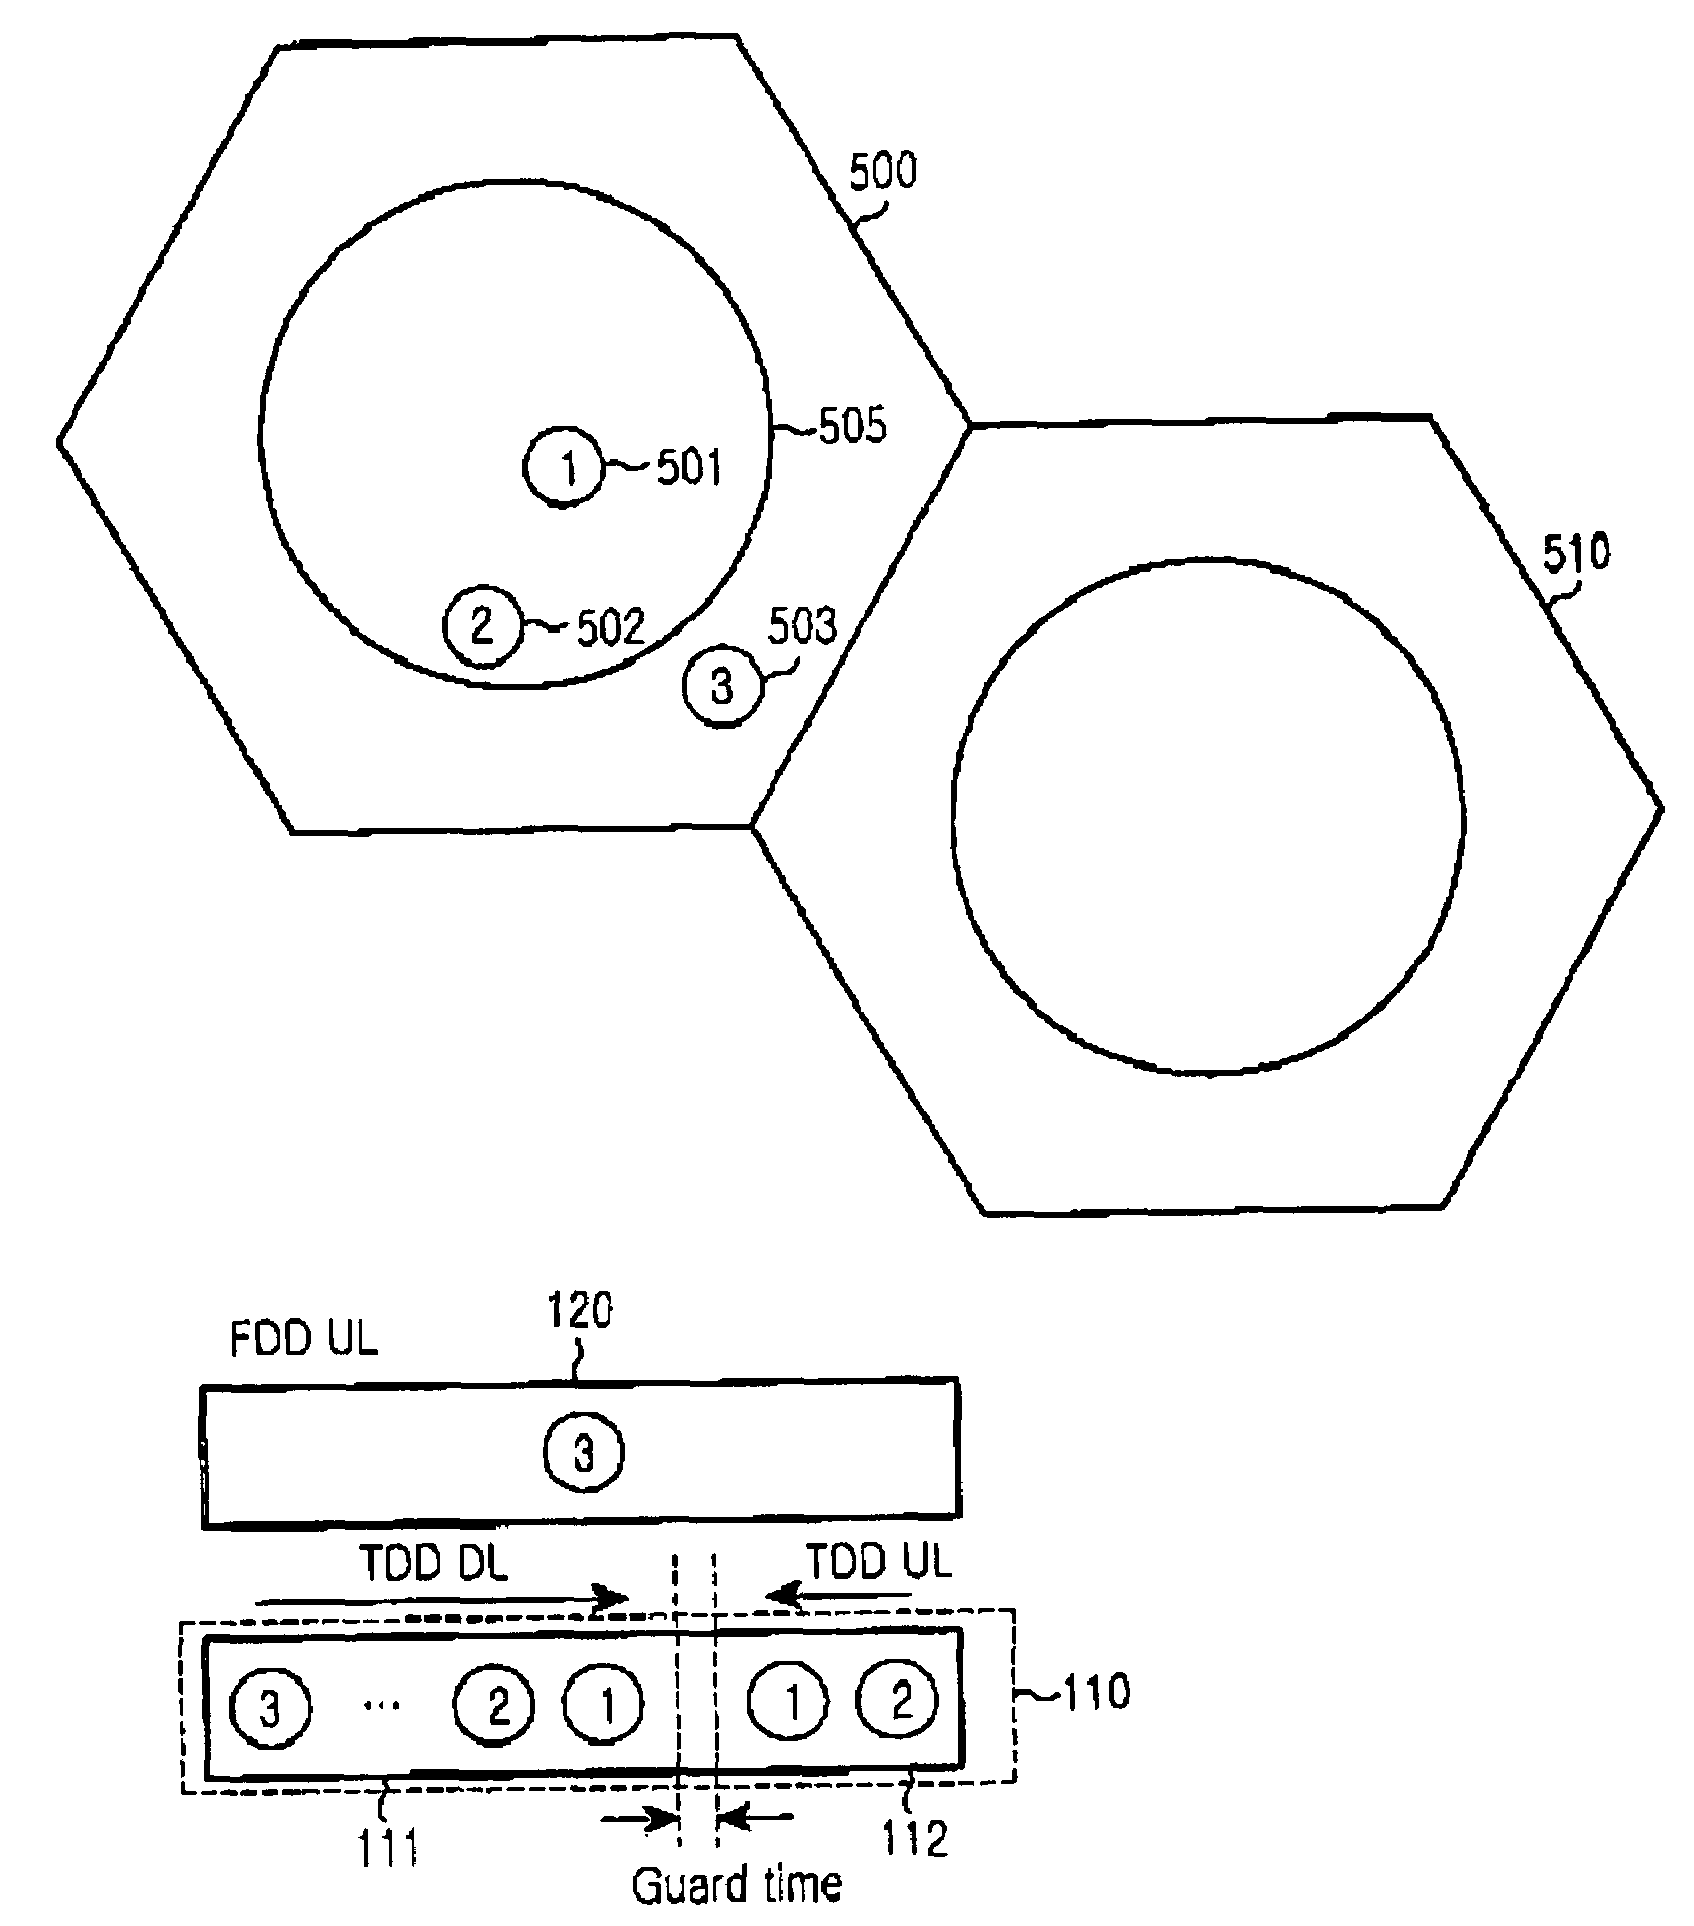 Wireless communication system and method for offering hybrid duplexing technology